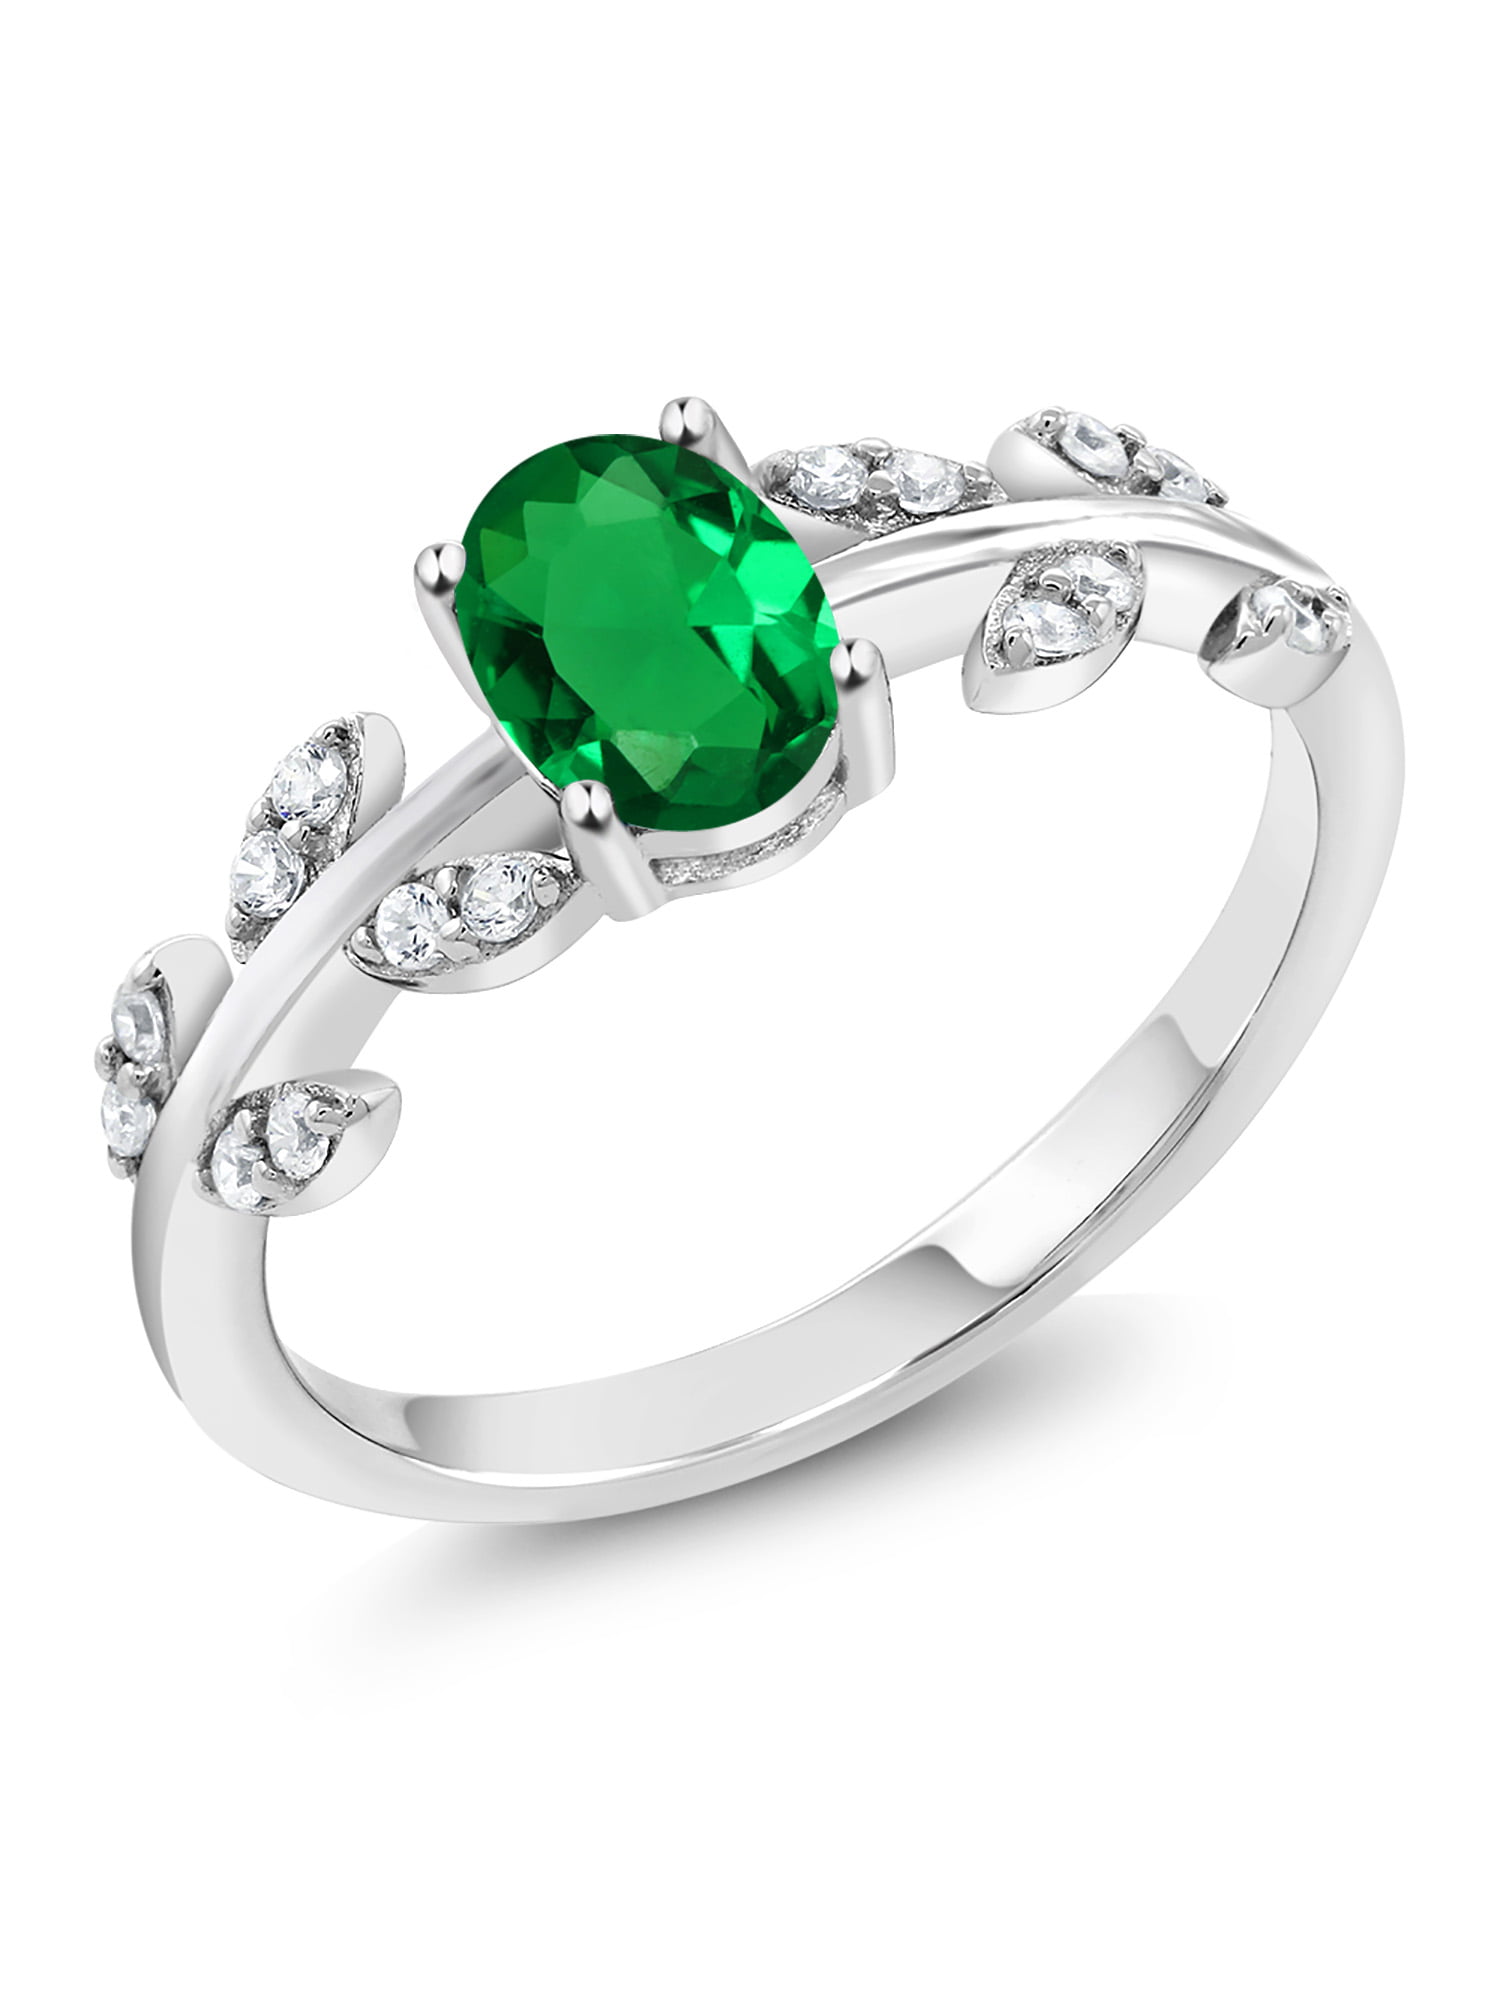 Free Jewelry Box Simple Style Emerald 100% 925 Sterling Silver Ring Size 6 7 8 9 